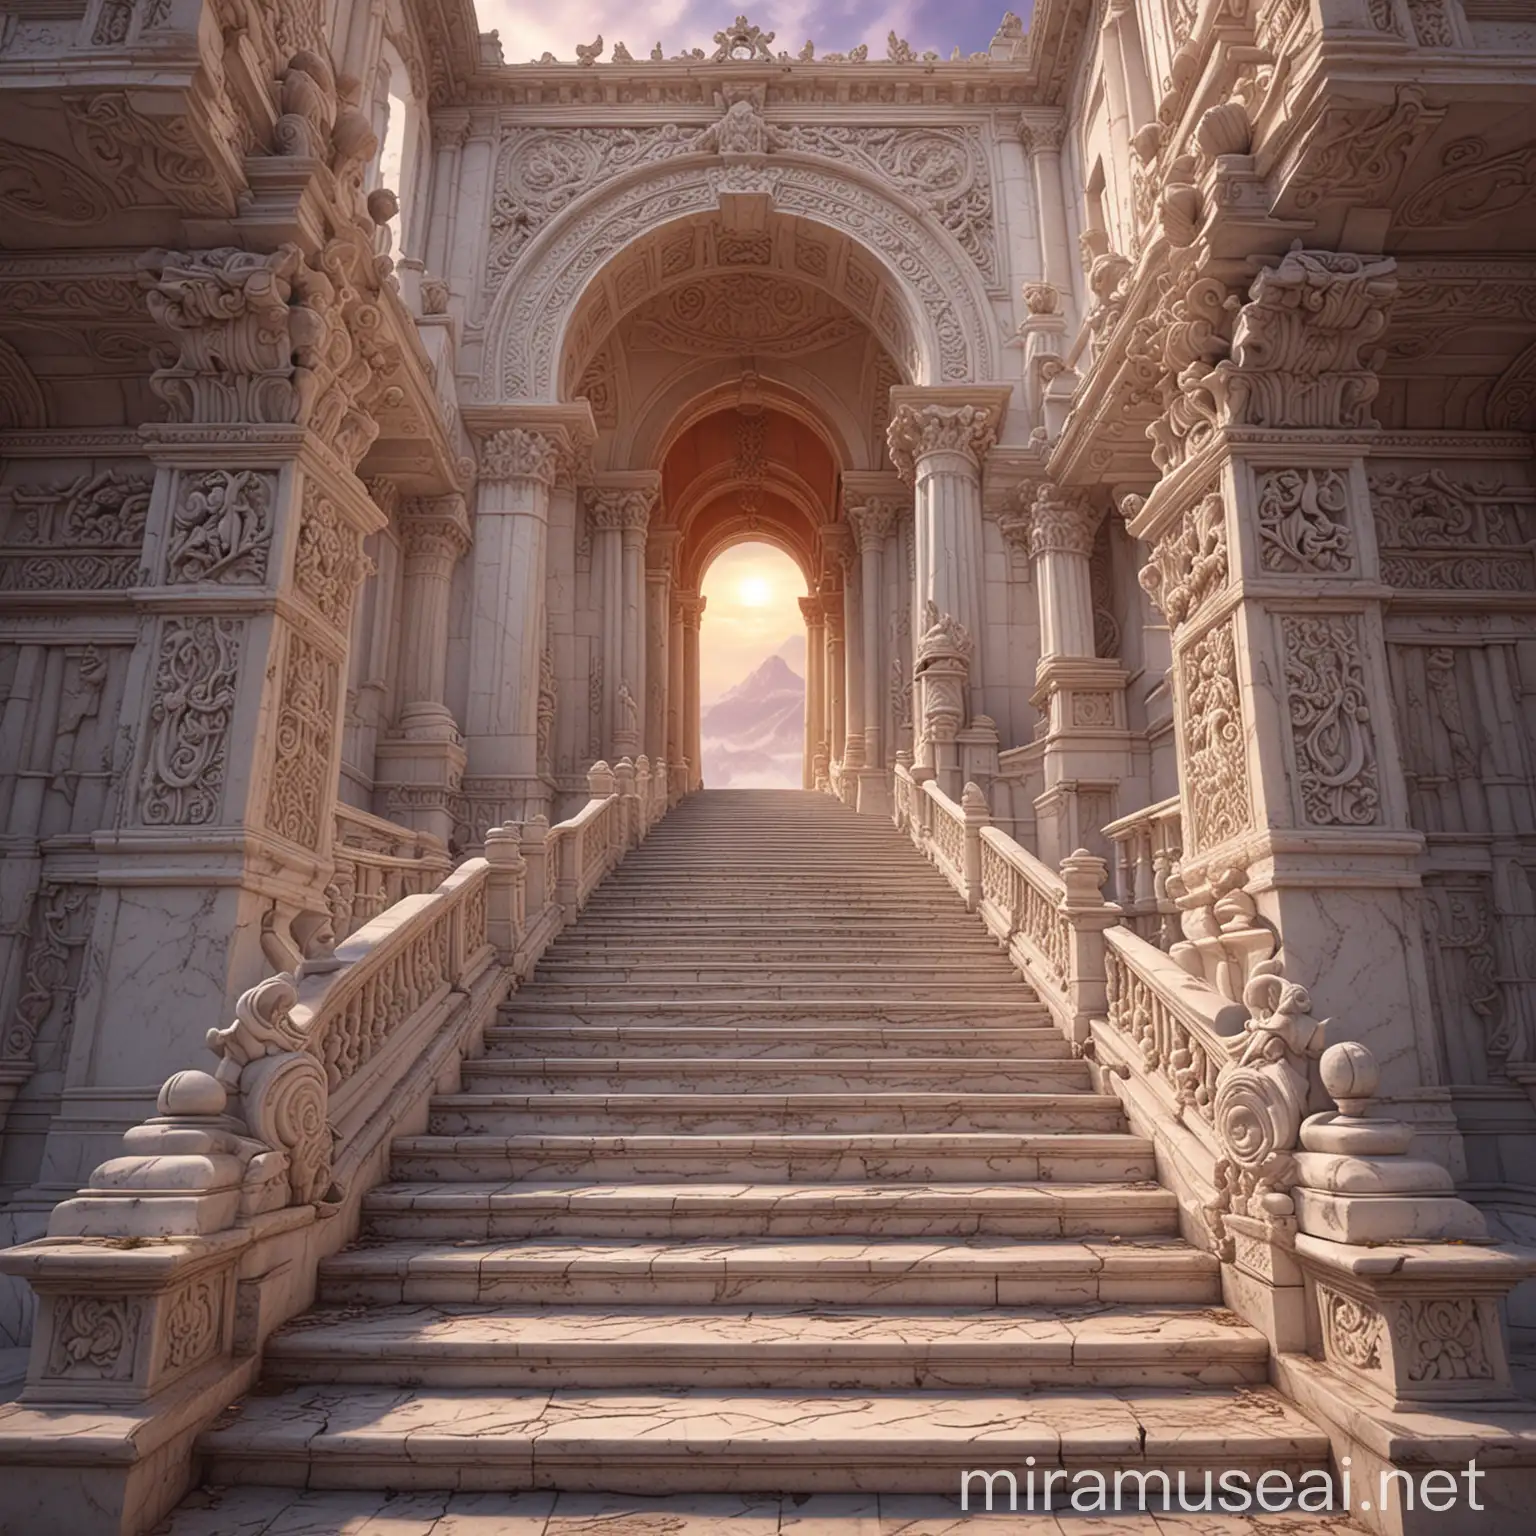 A photorealistic image of a majestic stairway leading up to a high vast and majestic kingdom. The stairway is made of white marble with intricate carvings on the sides. The steps are wide and grand, leading upwards towards a kingdom shrouded in mist. The kingdom is perched on a mountaintop, with tall towers and spires piercing the clouds. The sky is a vibrant orange and purple sunset, casting a warm glow on the entire scene.  Focus on the details of the stairway and the grandeur of the kingdom in the distance.